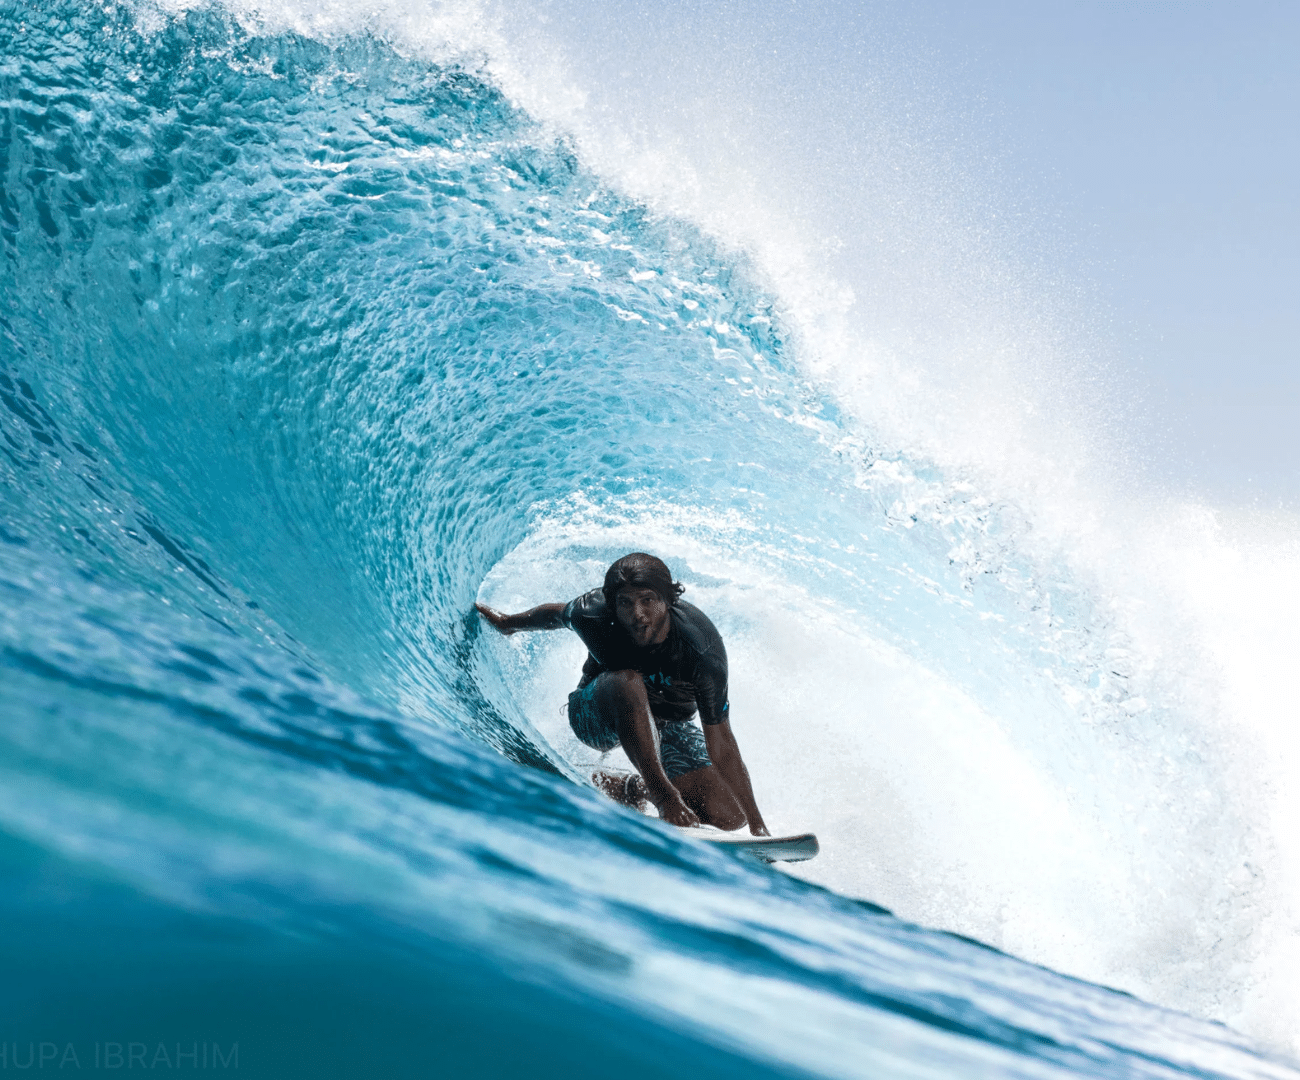 Surfing during a trip to the Maldives